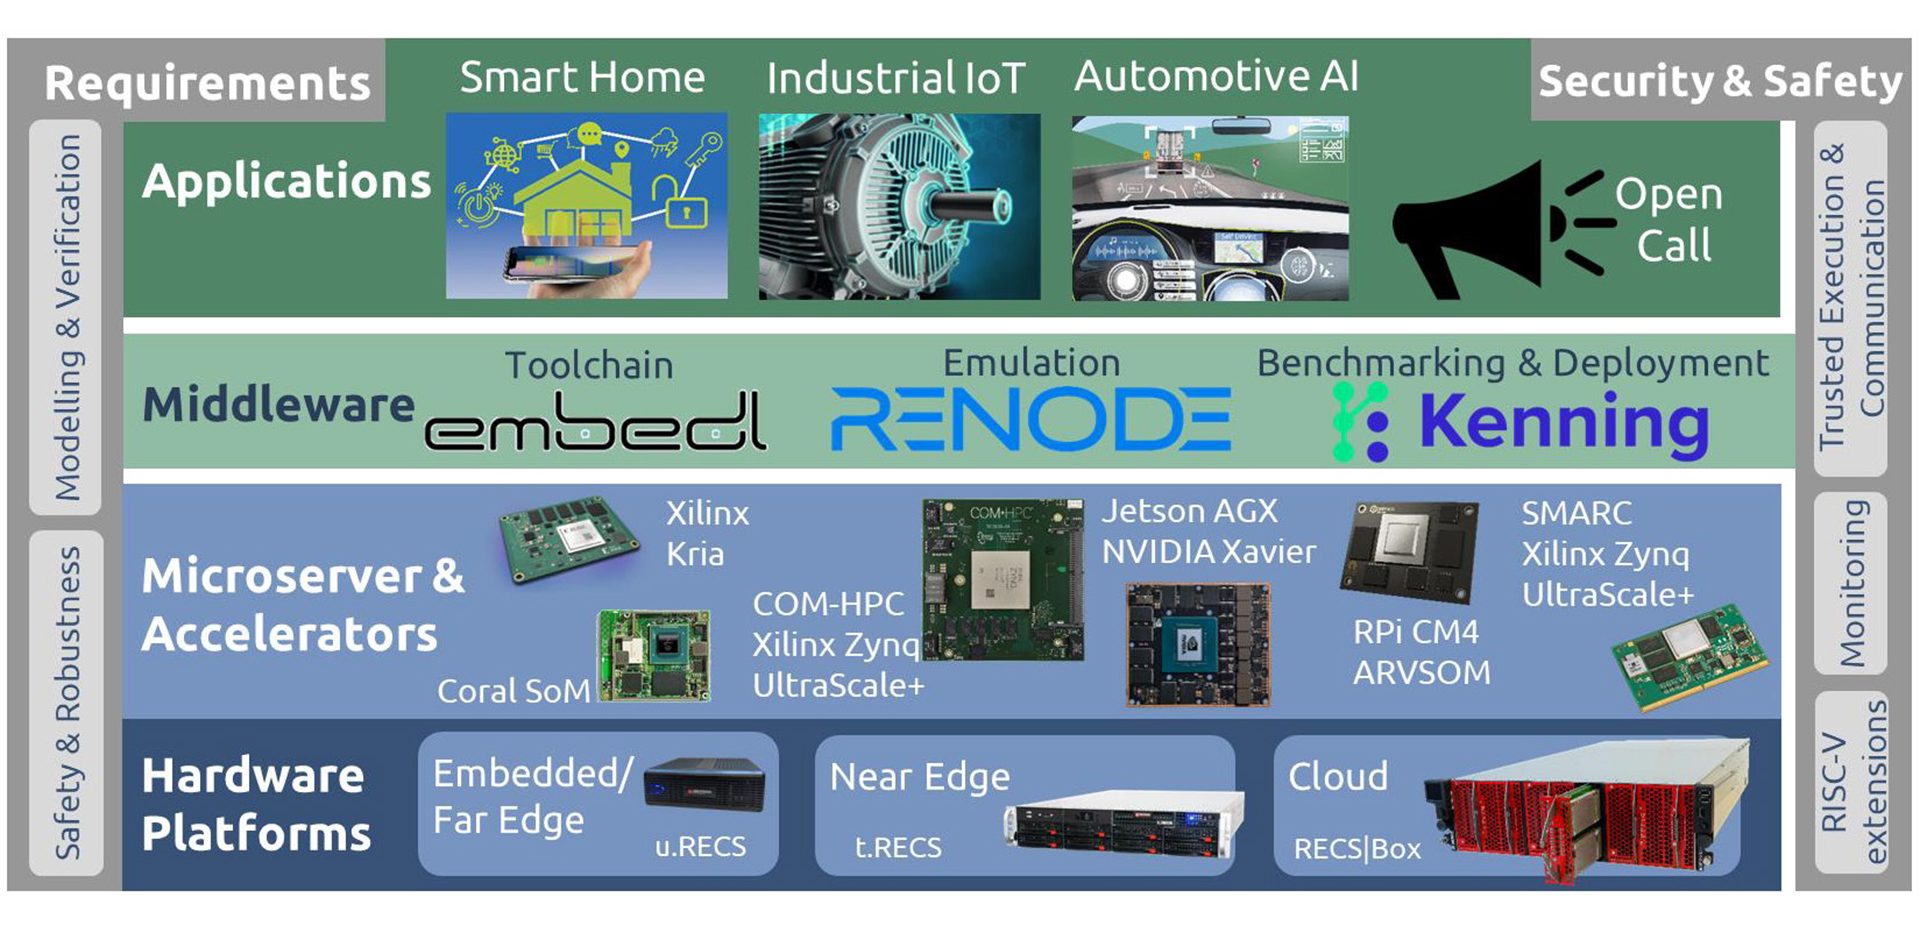 Overview of VEDLIoT technology layers and component, iot systems